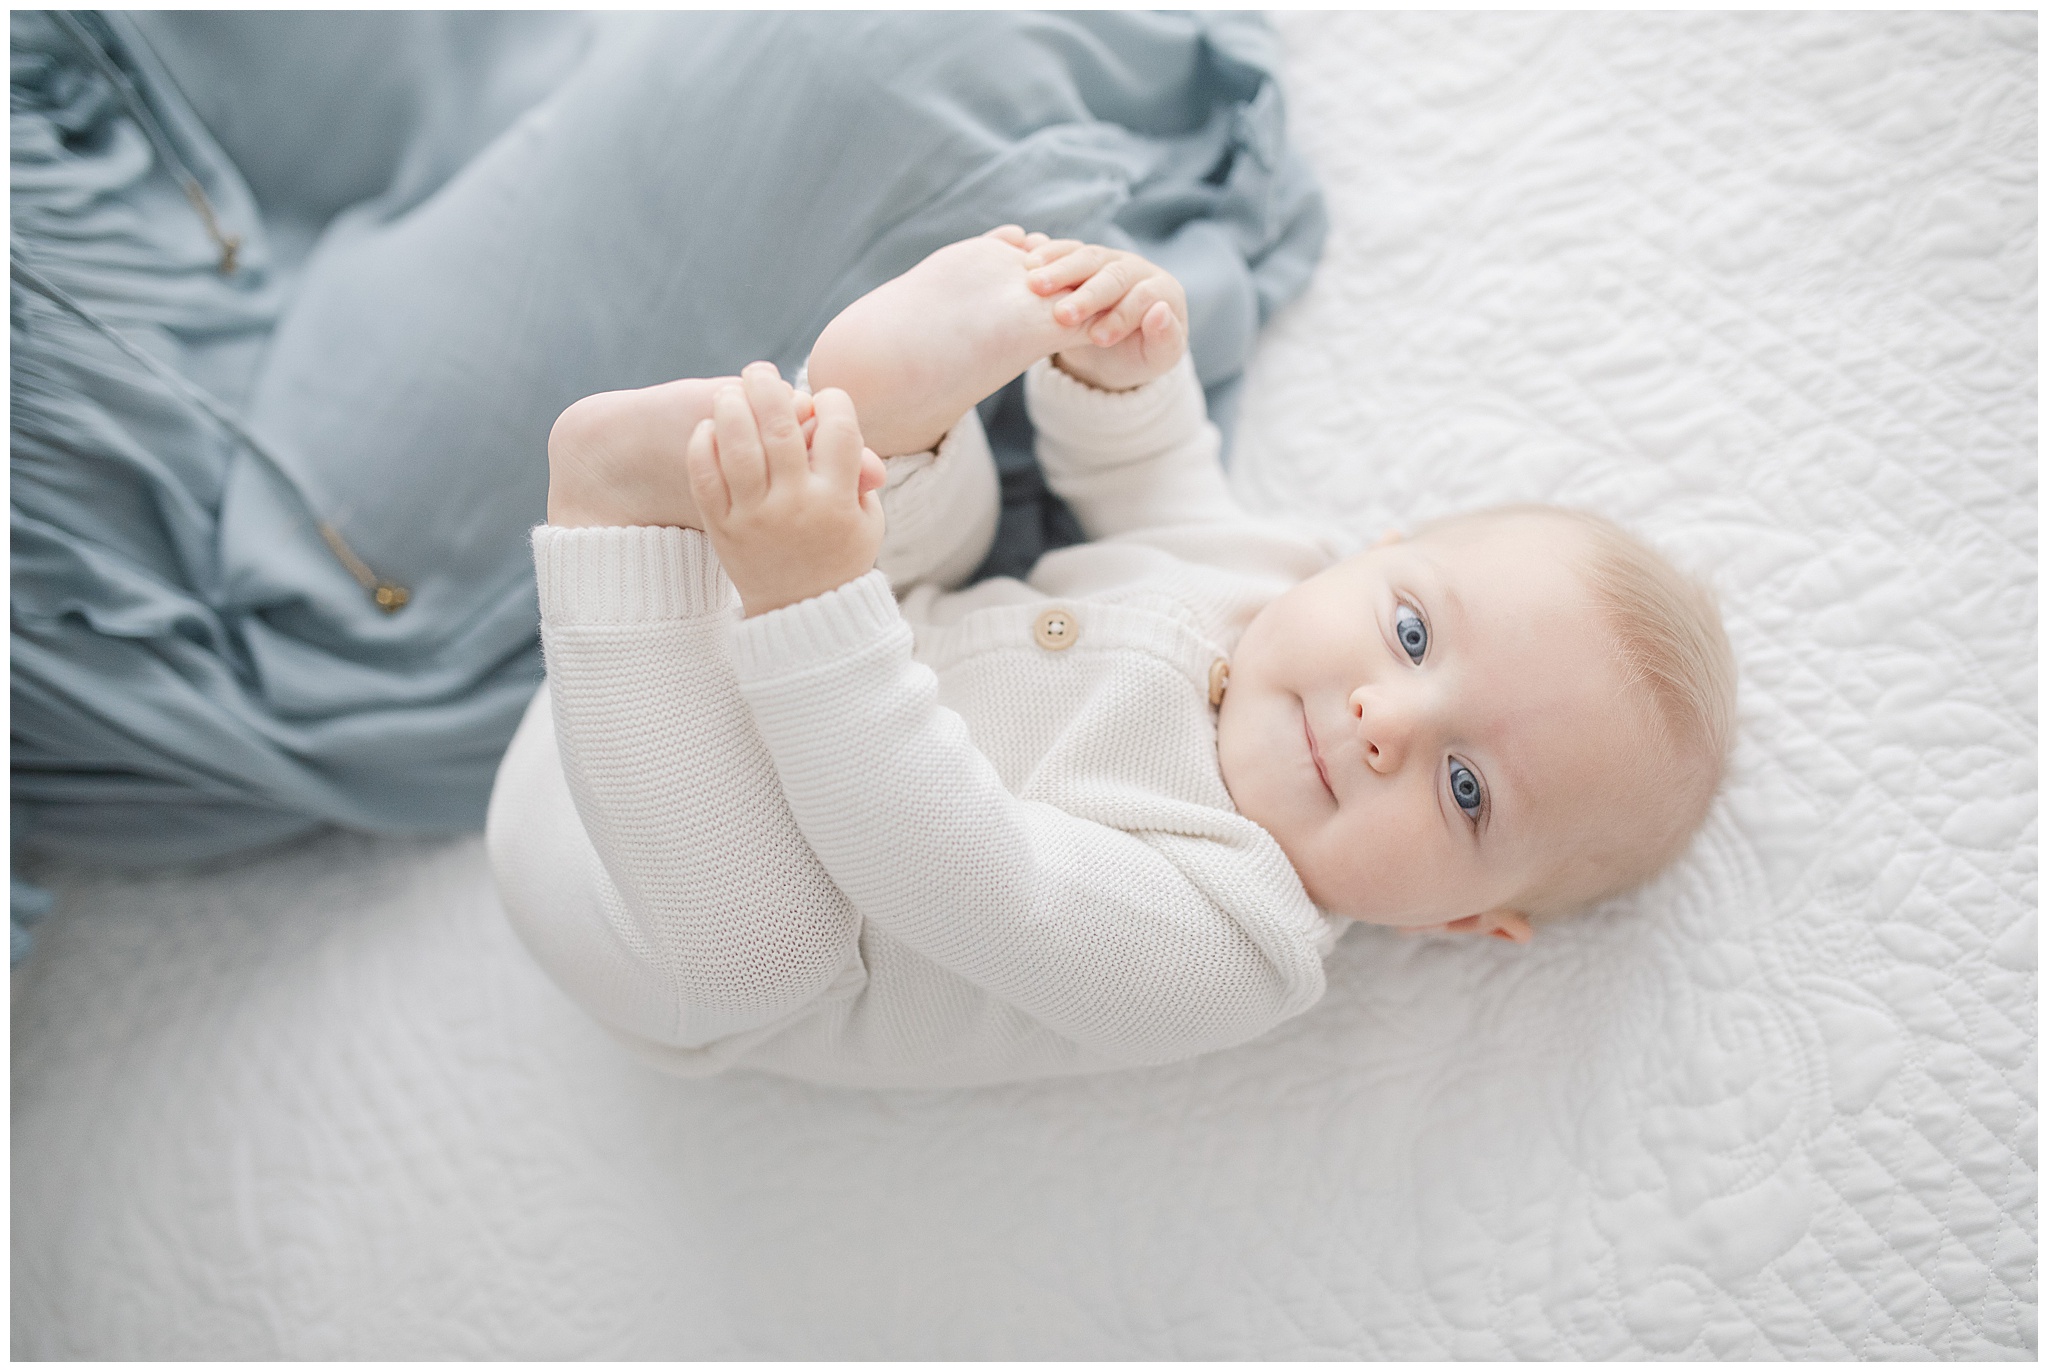 Baby boy discovers his feet. Photo by Little Sunshine Photography.